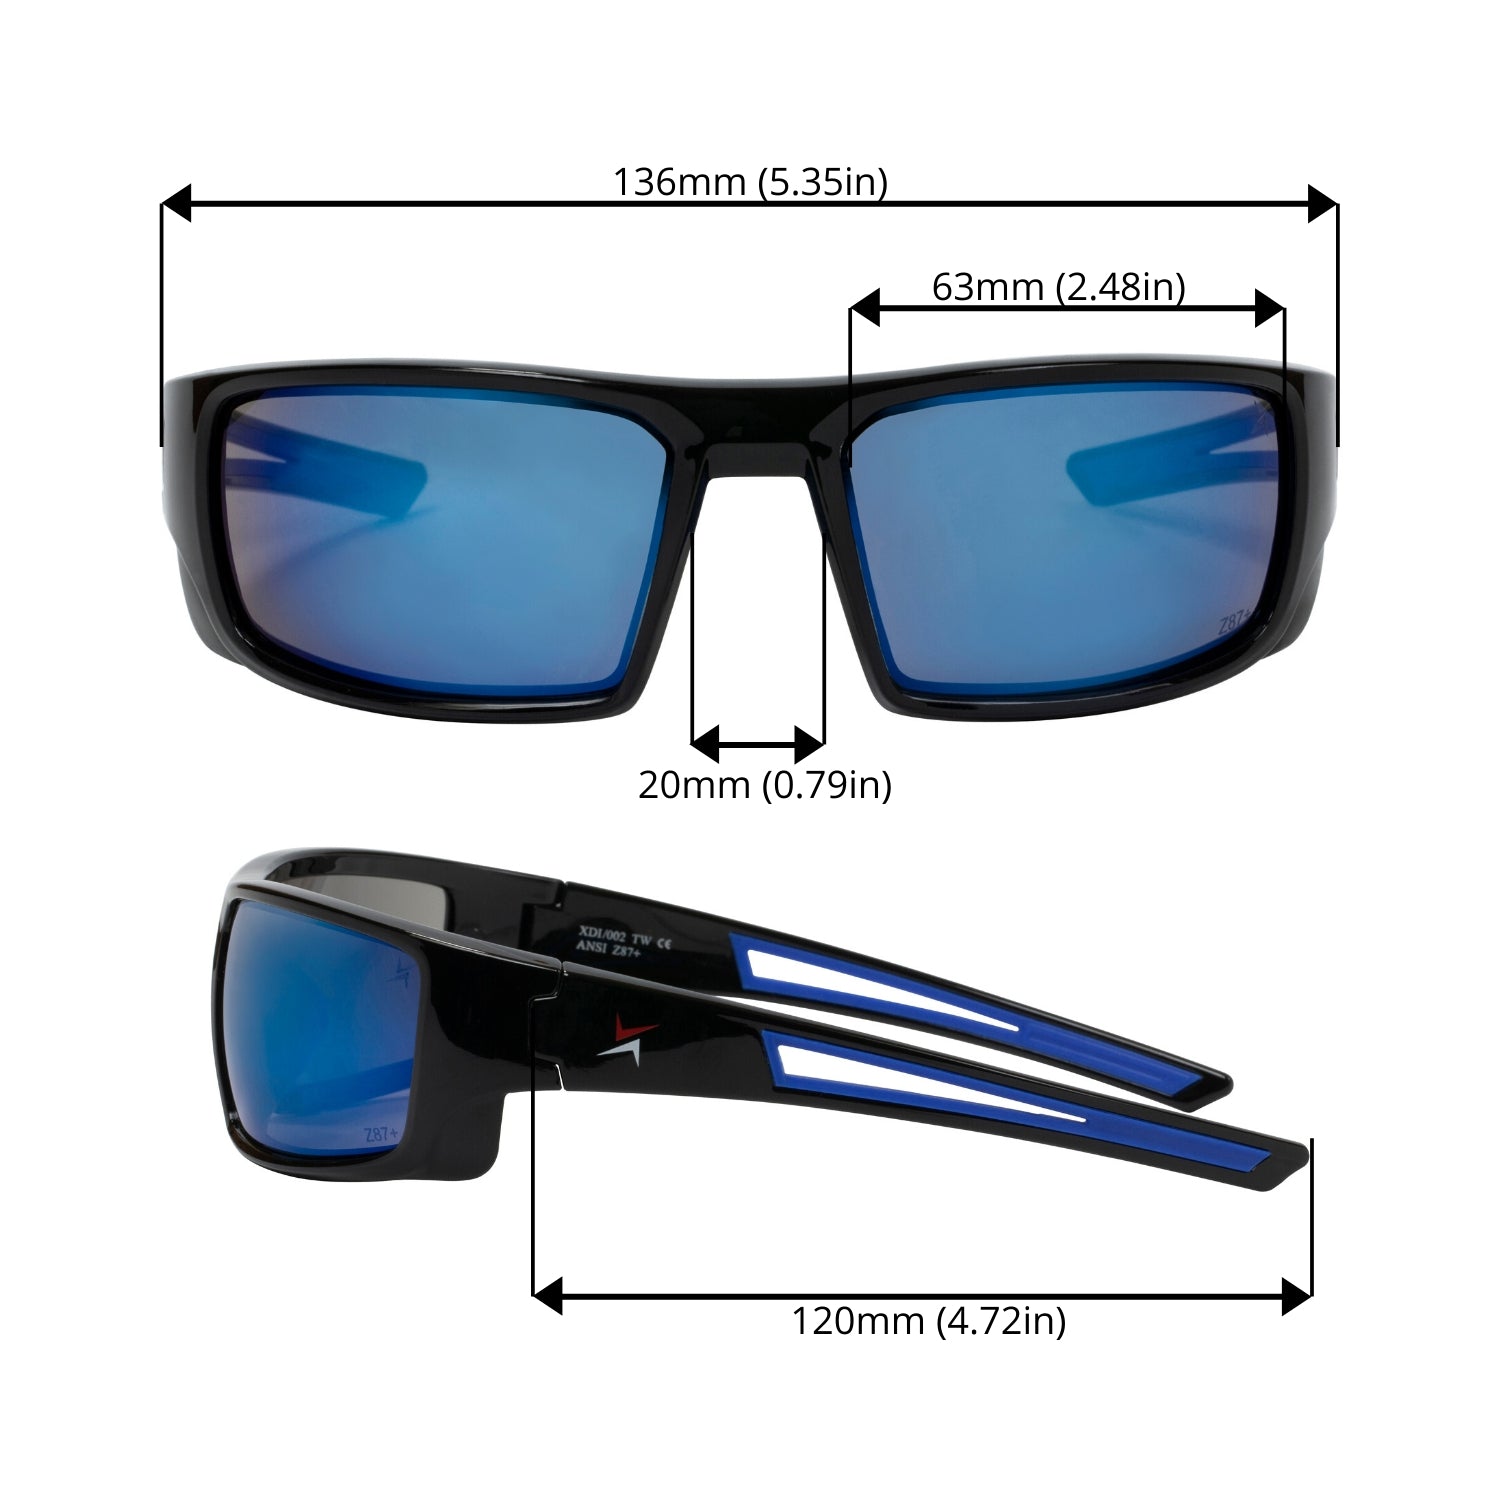 Blue Mirror Lens Sport Safety Sunglasses with Blue Rubber Accents.